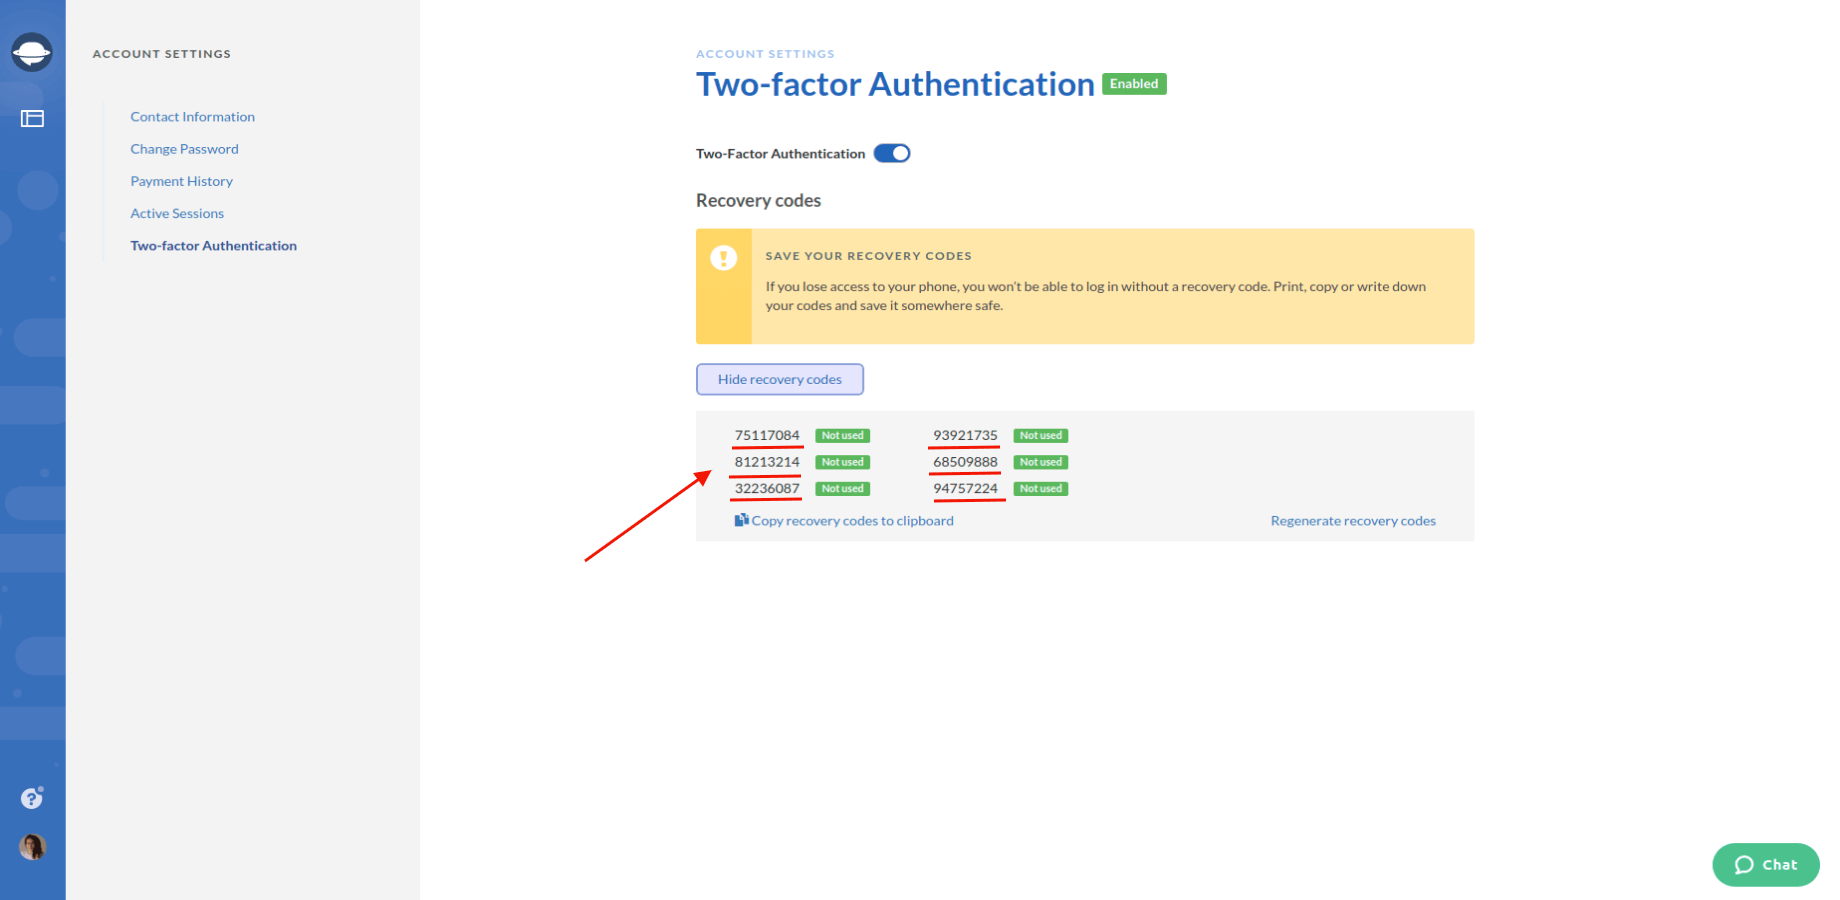 Migration Wizard's Two-Factor Authentication Verification Codes